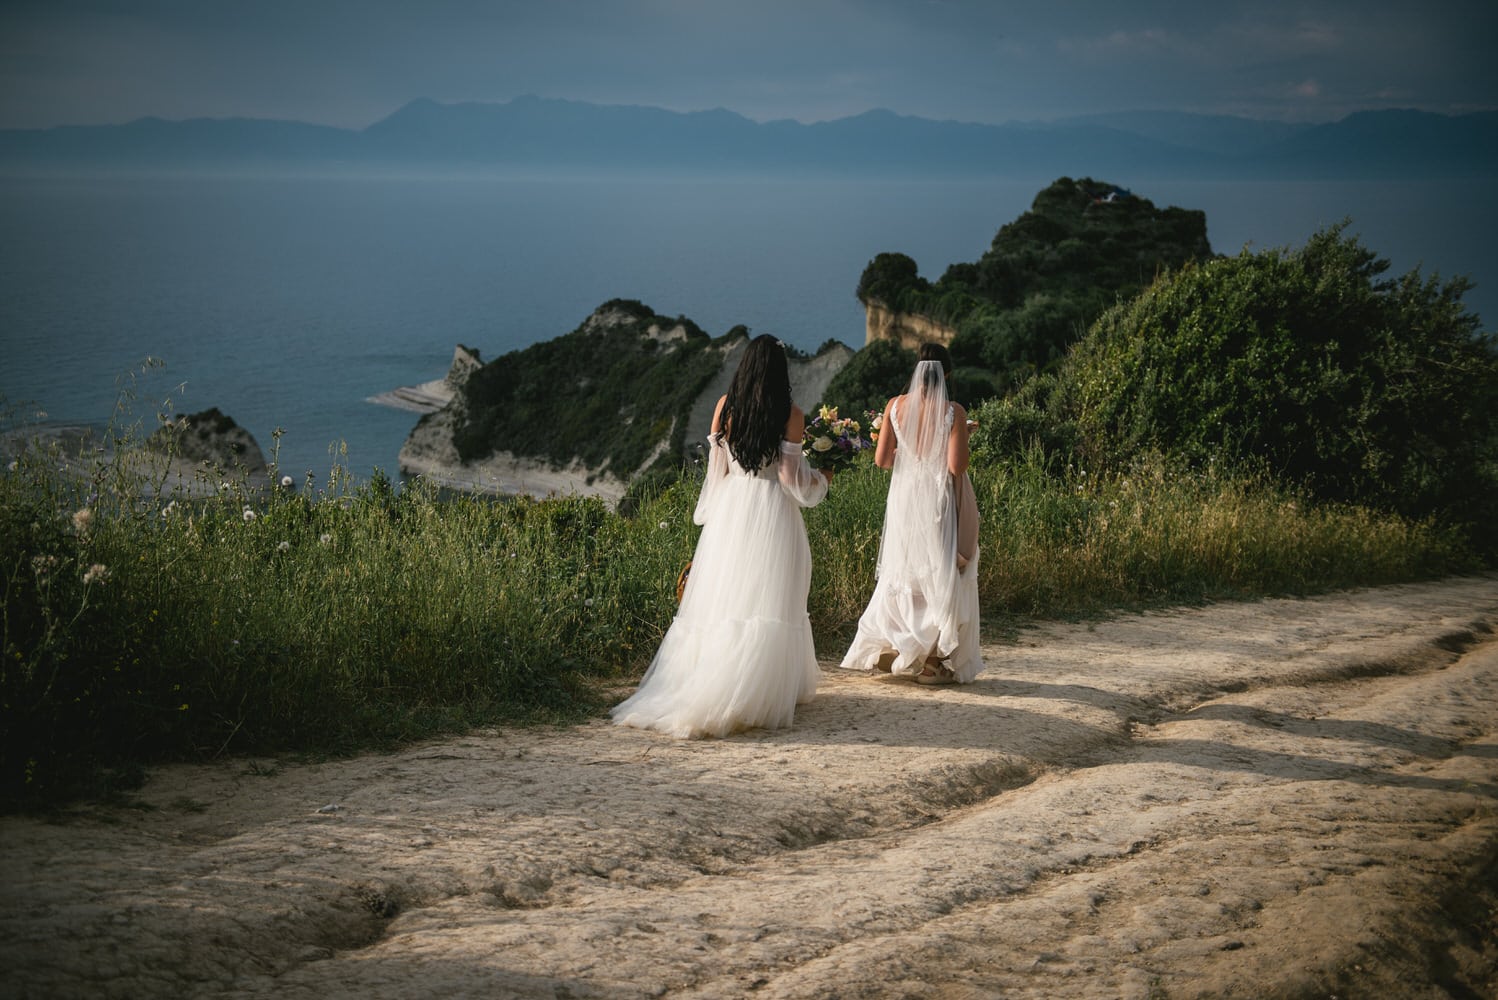 Brides walking on the cliff's edge, courage and love on their Corfu elopement.